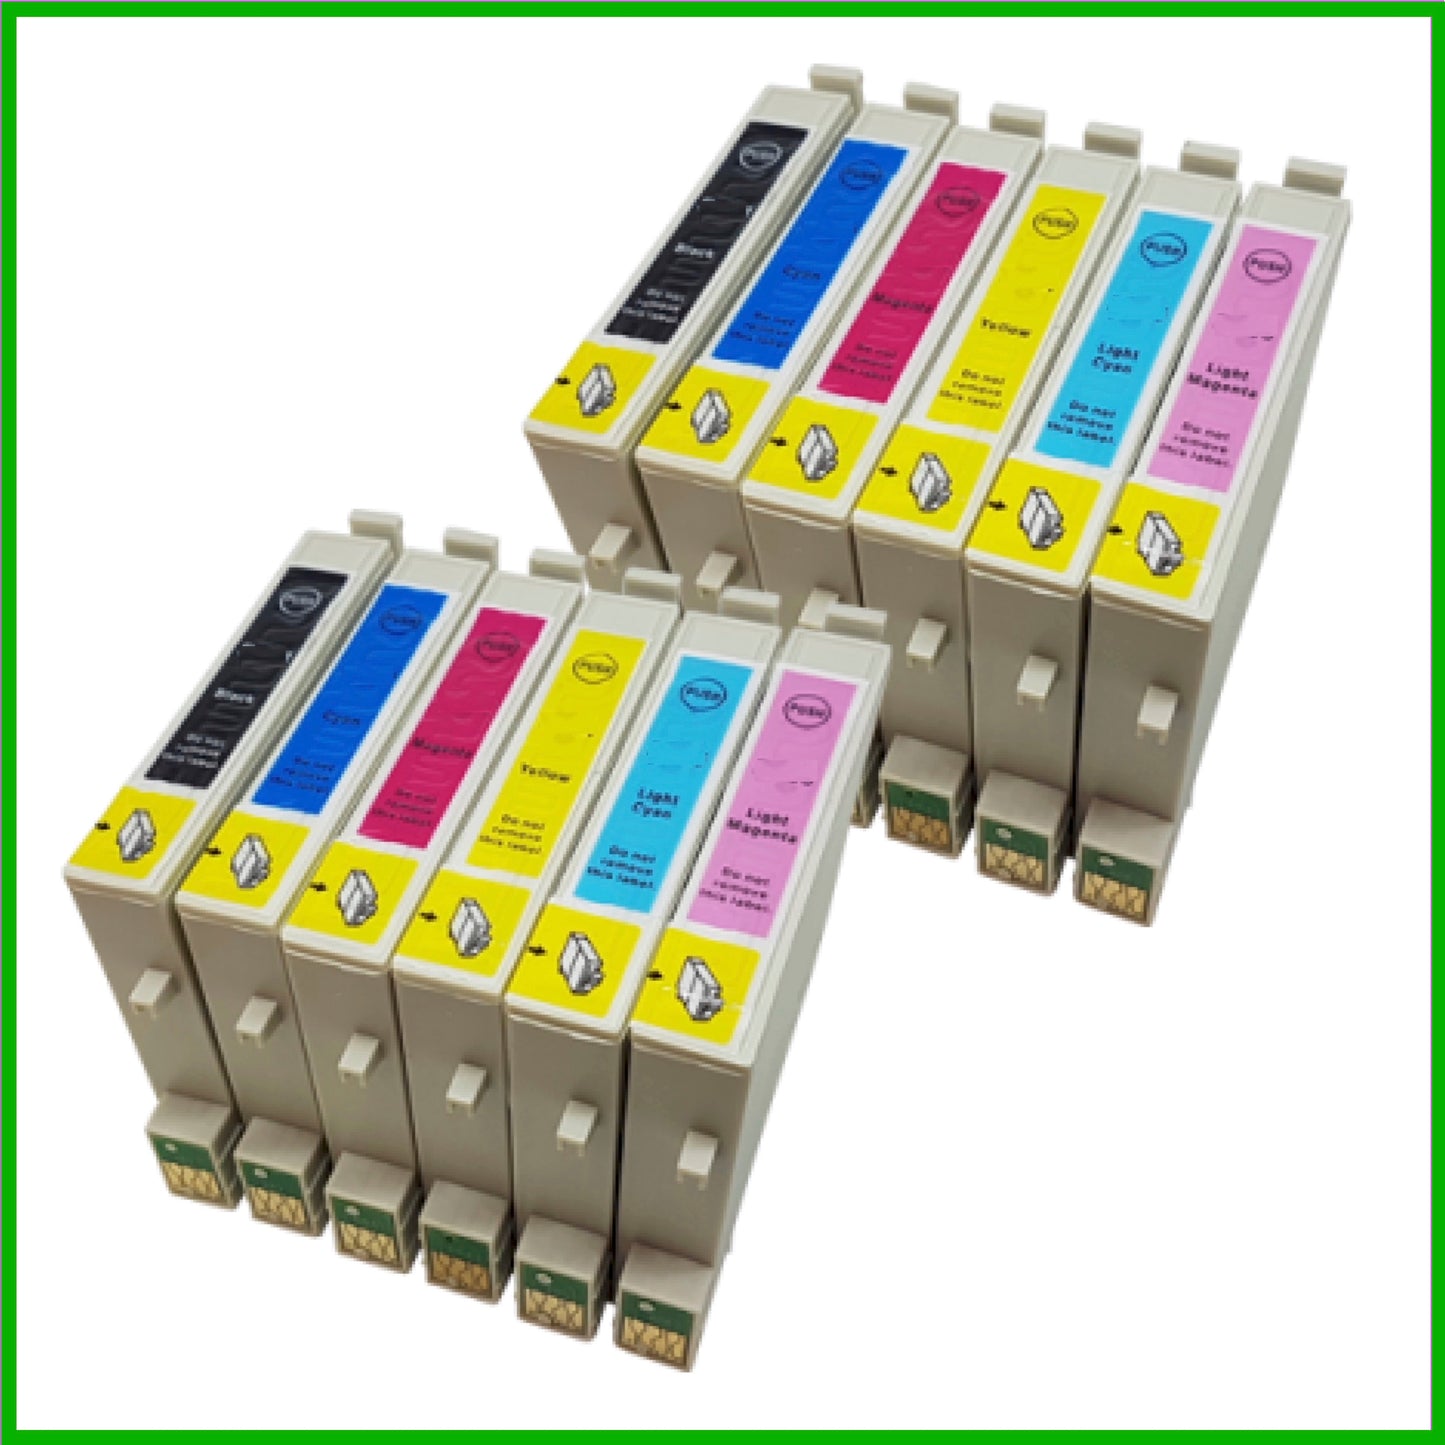 Compatible Epson 801/802/803/804/805/806 Multipack x2 Ink Cartridges BK/C/M/Y/LC/LM (Hummingbird)